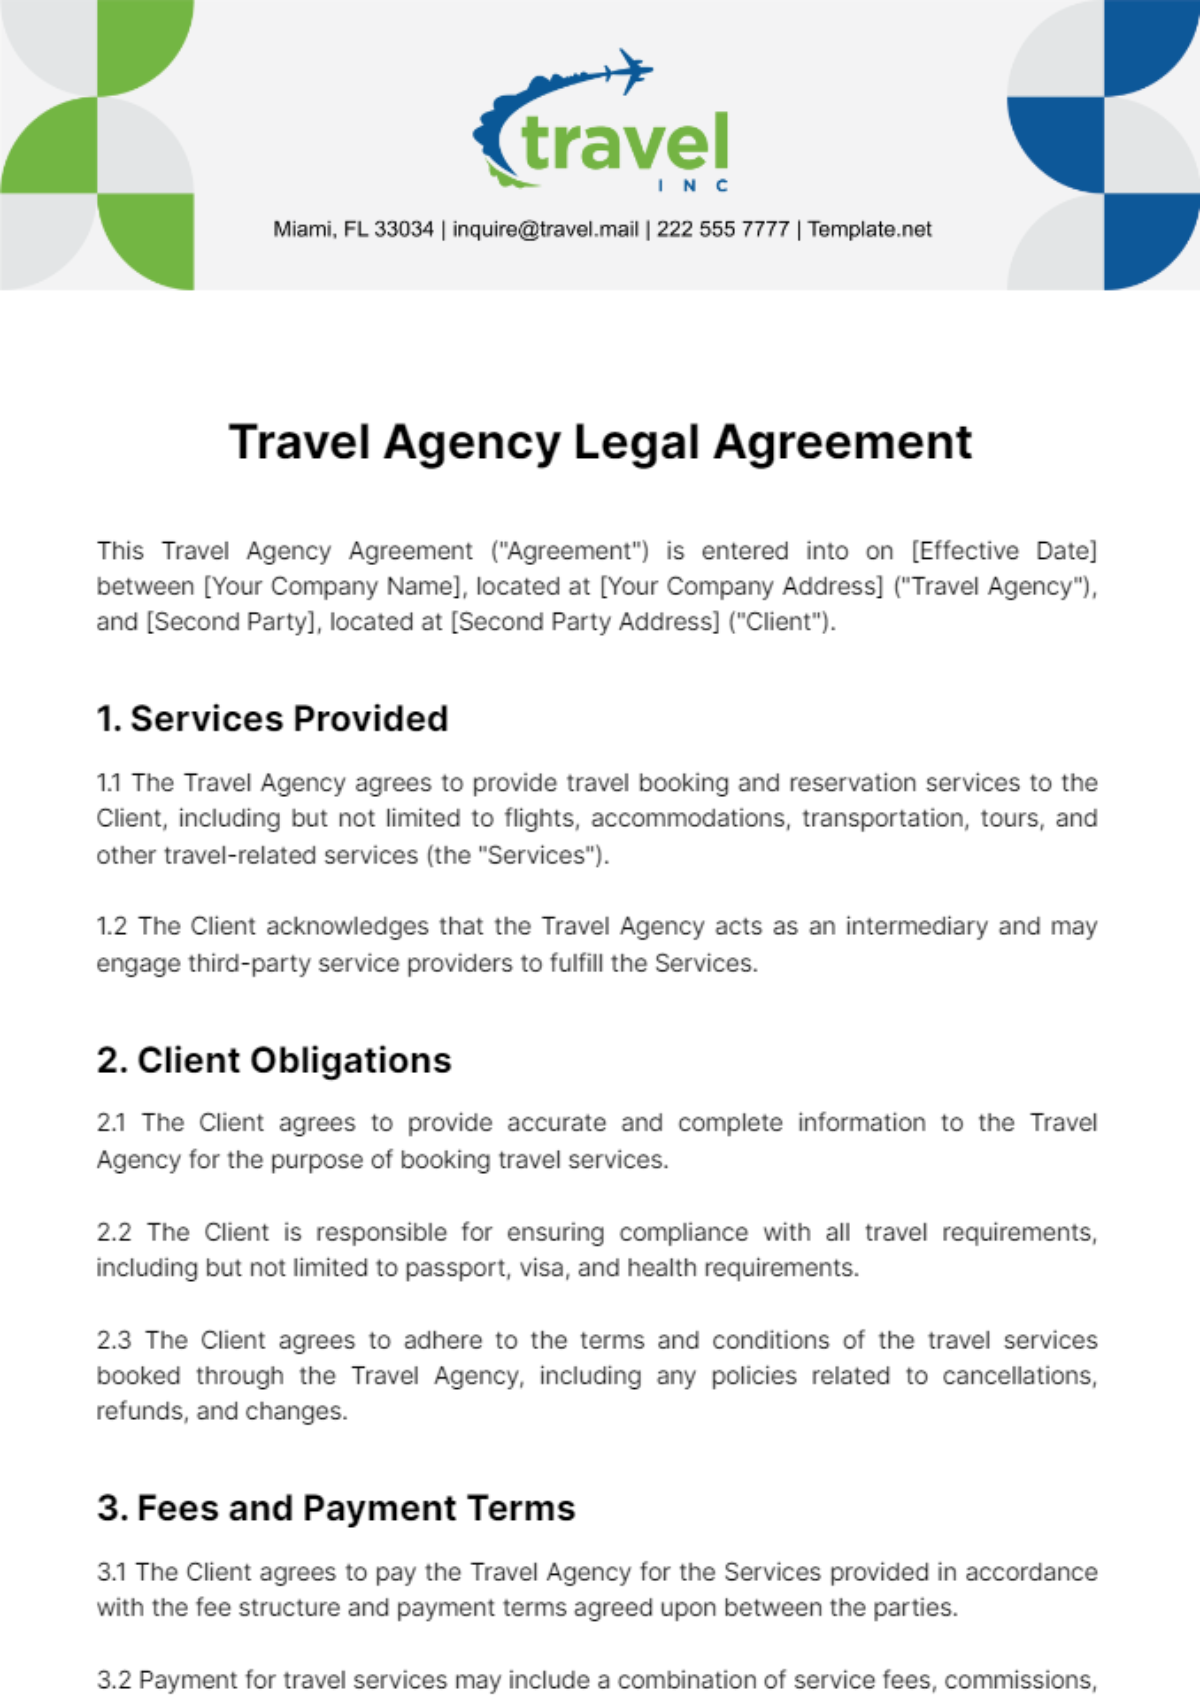 Travel Agency Legal Agreement Template